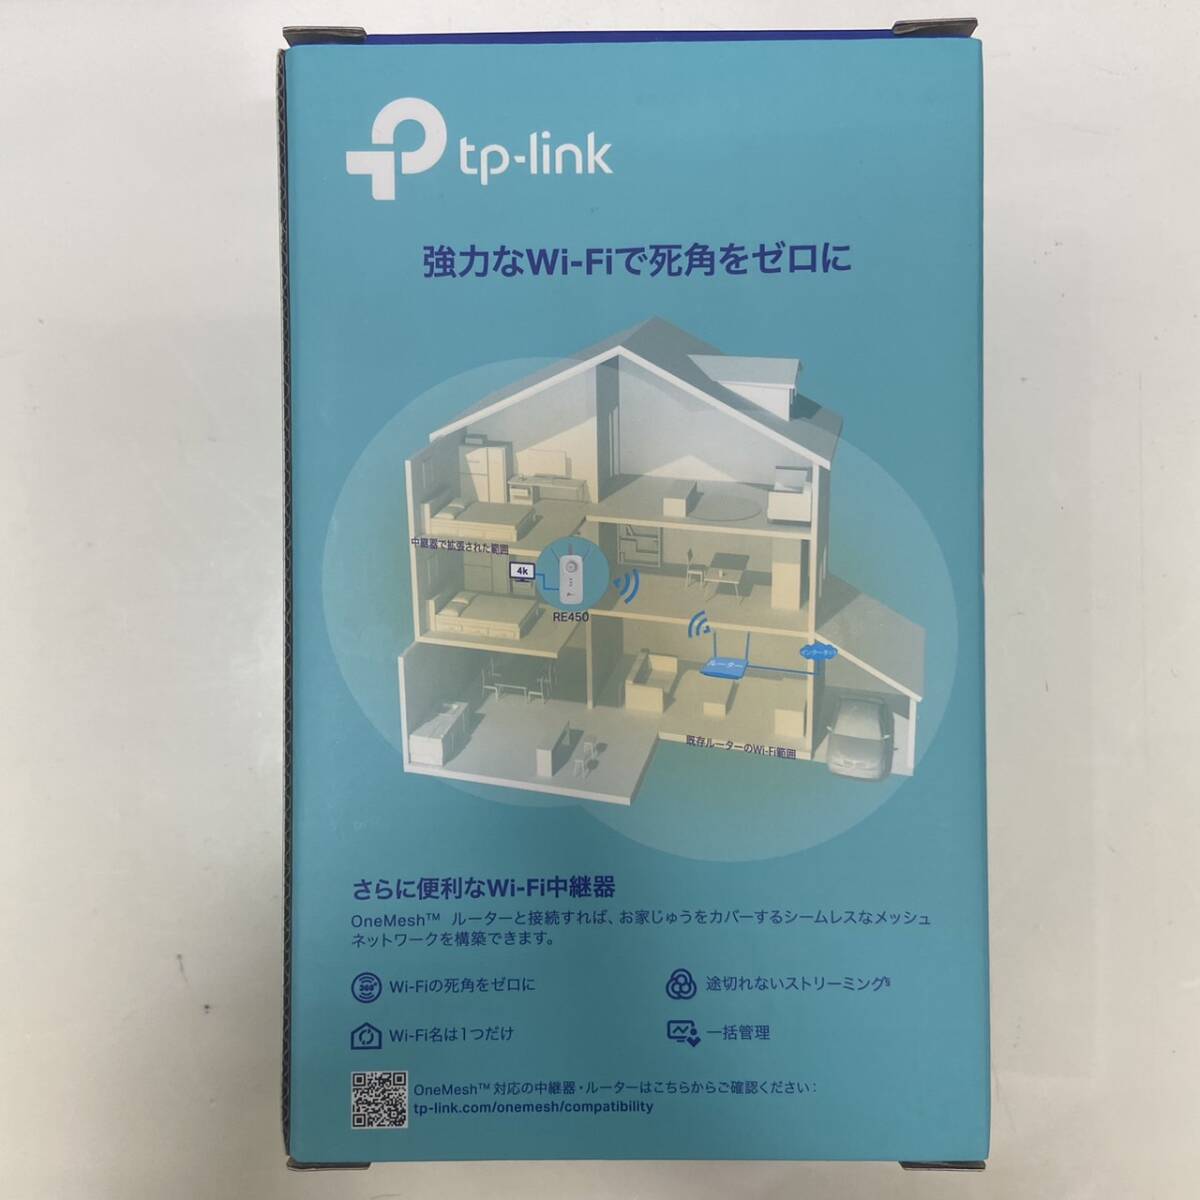 [B-13943] 1 jpy start TP-link RE450 mesh Wi-Fi relay vessel AC1750 dual band box attaching electrification has confirmed condition photograph reference 